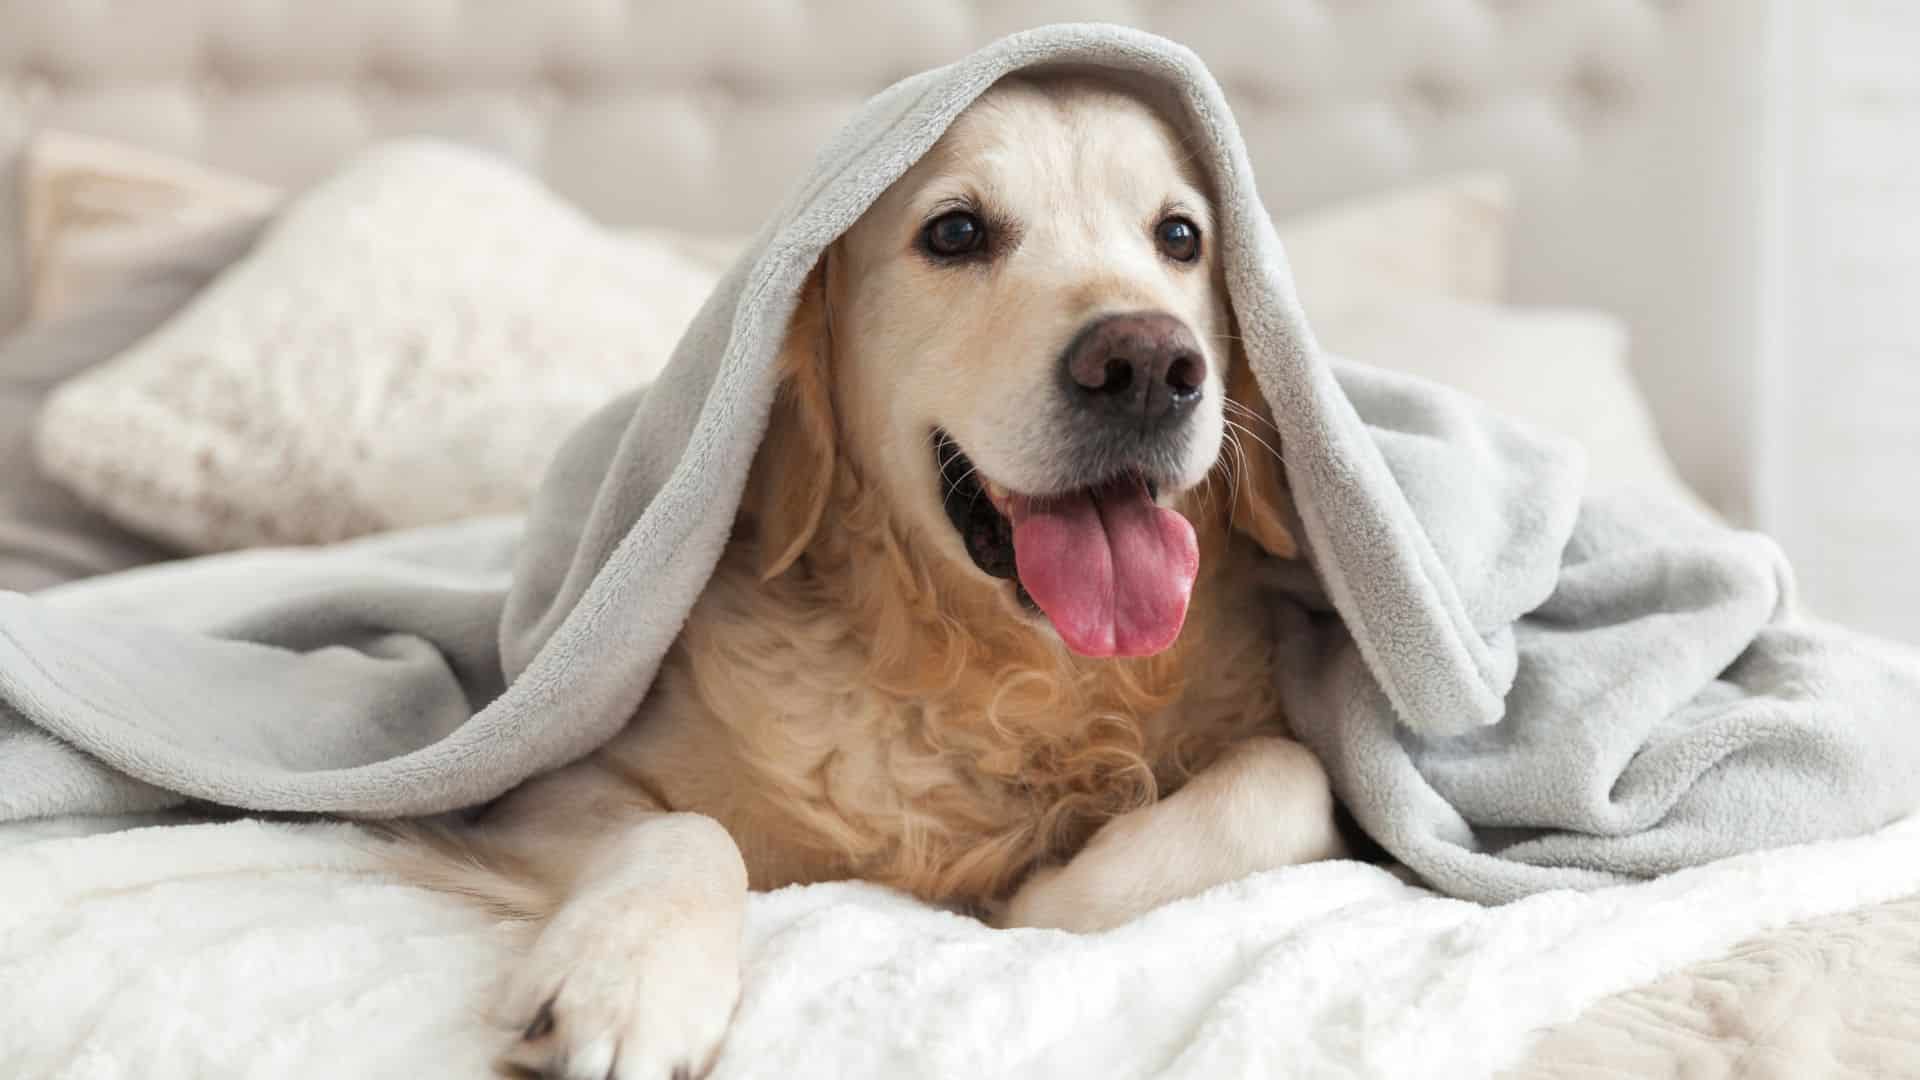 A goldren retriever is lying on a bed, covered in a soft blanket, as though it is staying in a luxury dog boarding facility.